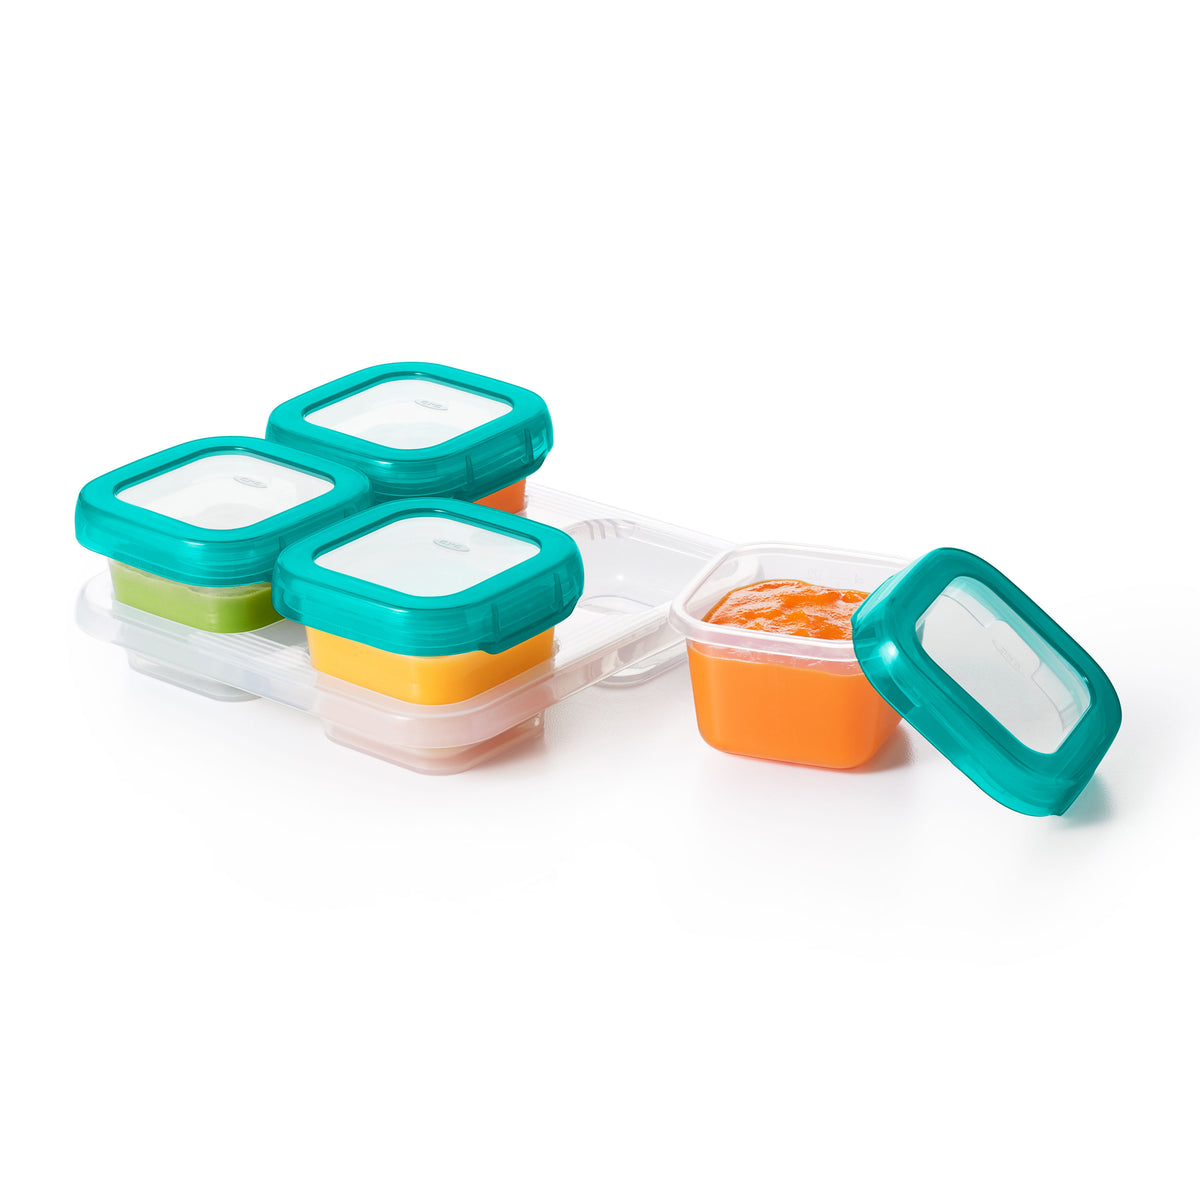 Baby Blocks Freezer Storage Containers by Oxotot